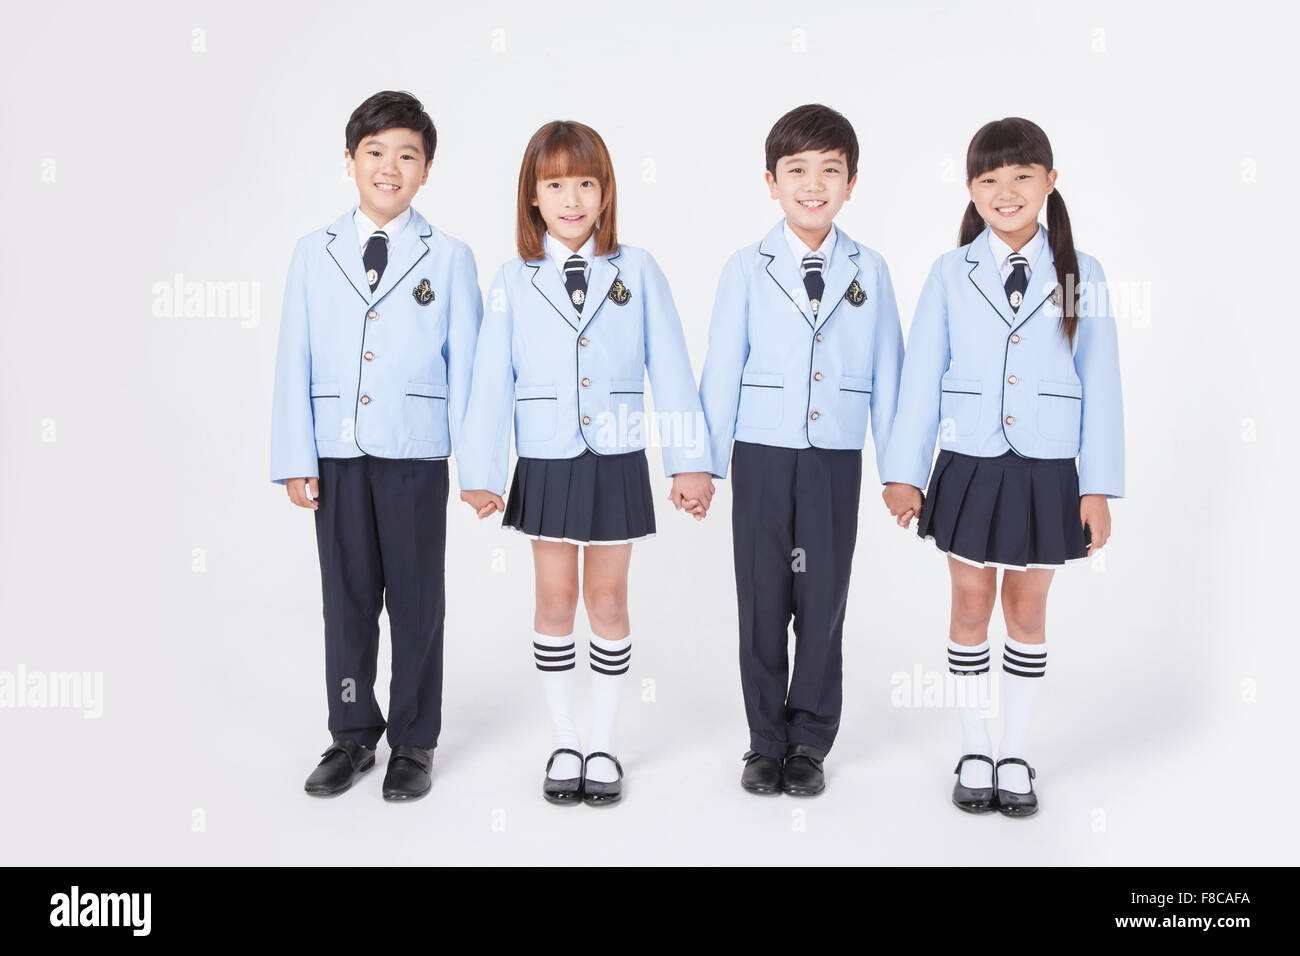 Four elementary school age kids standing and holding each other's hand and smiling Stock Photo